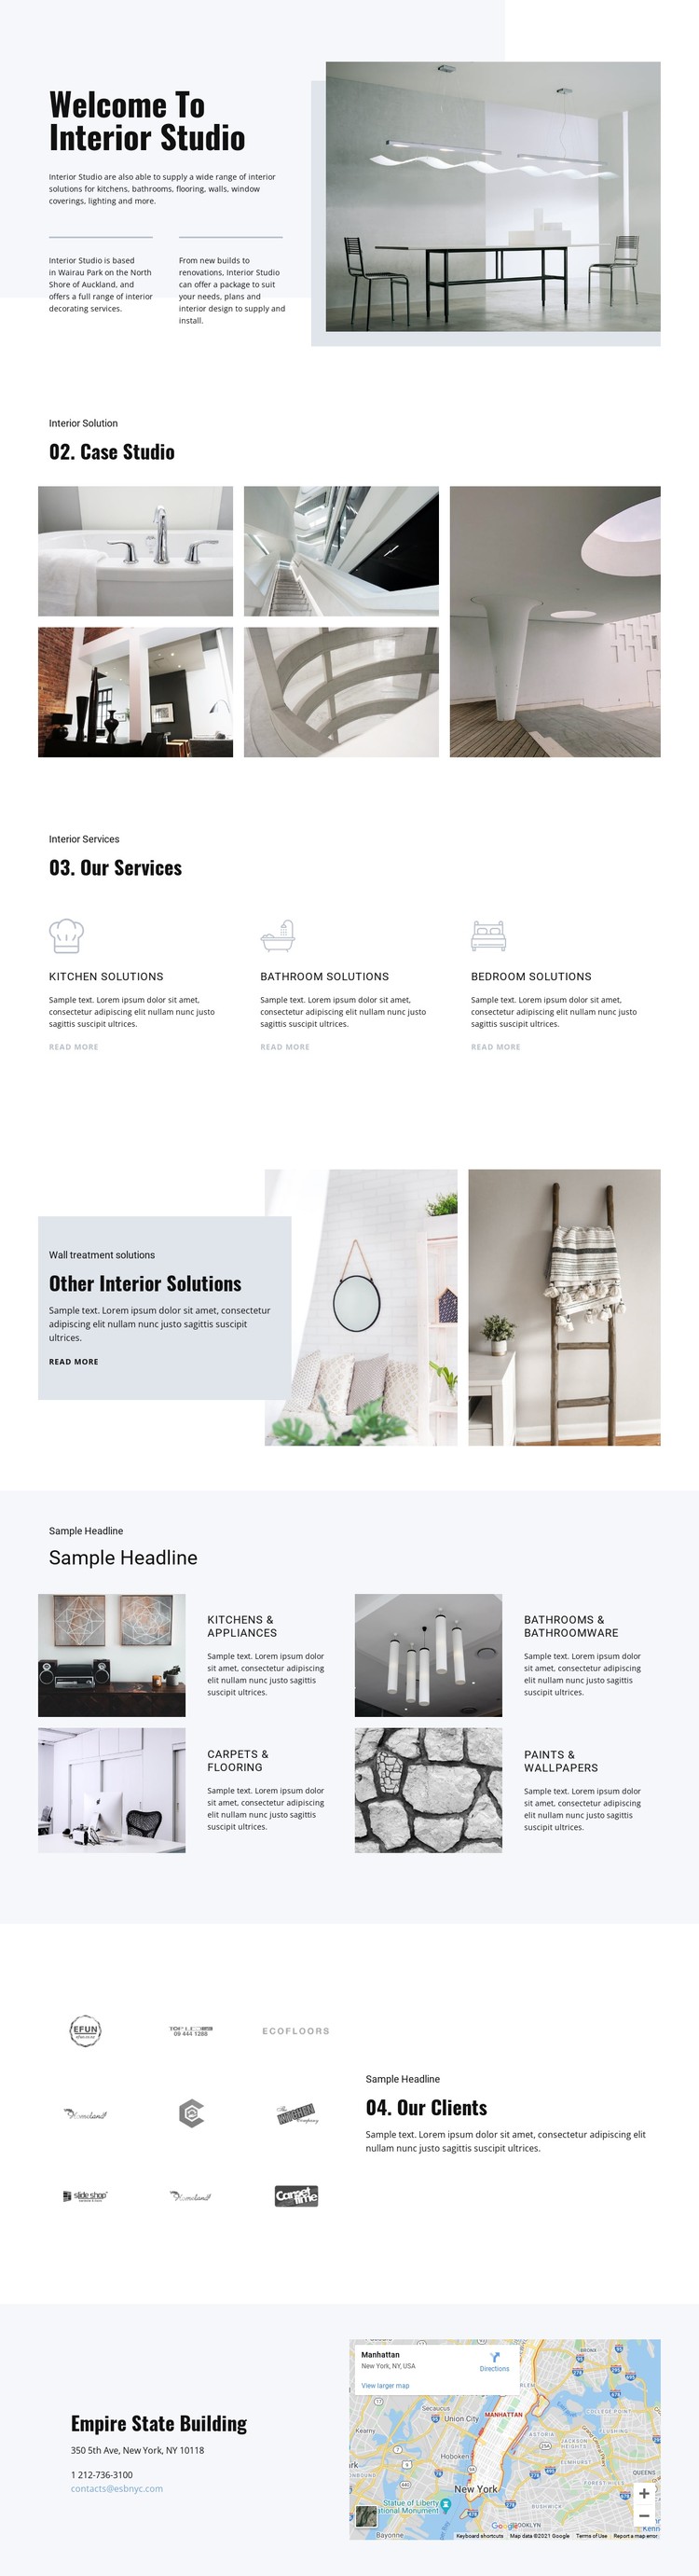 Welcome to interior studio CSS Template